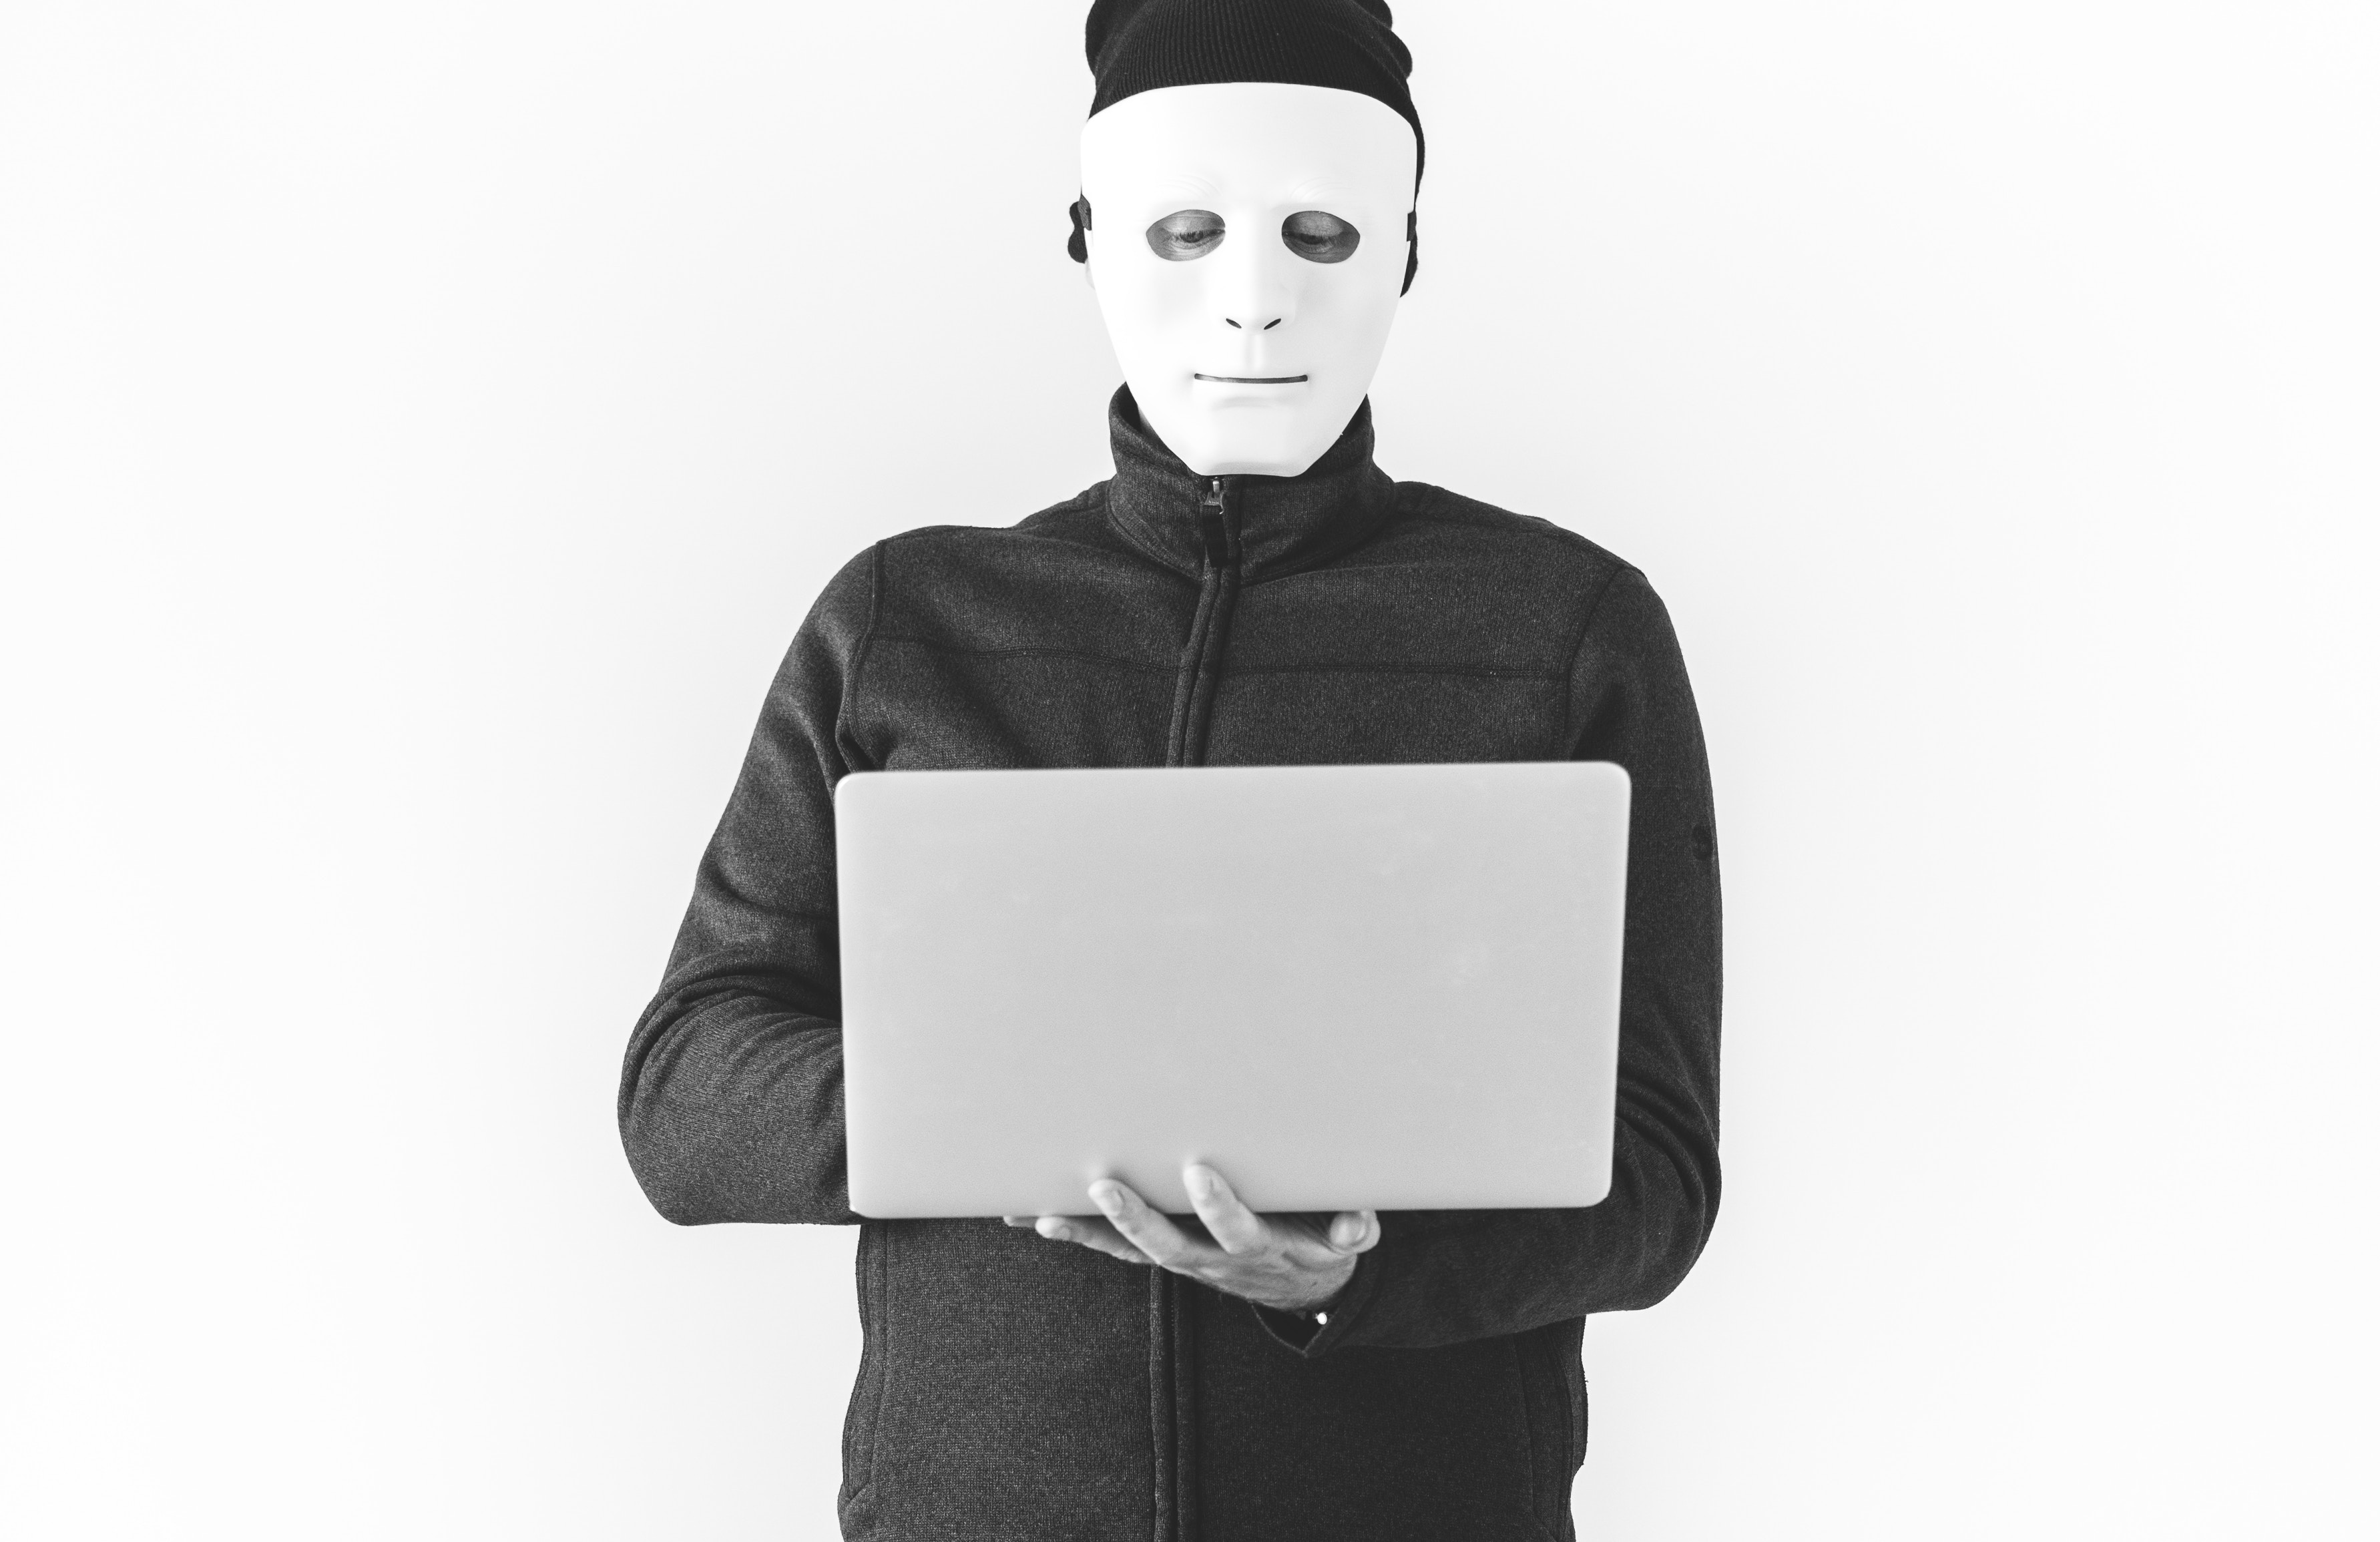 hacker with a face mask on holding a laptop